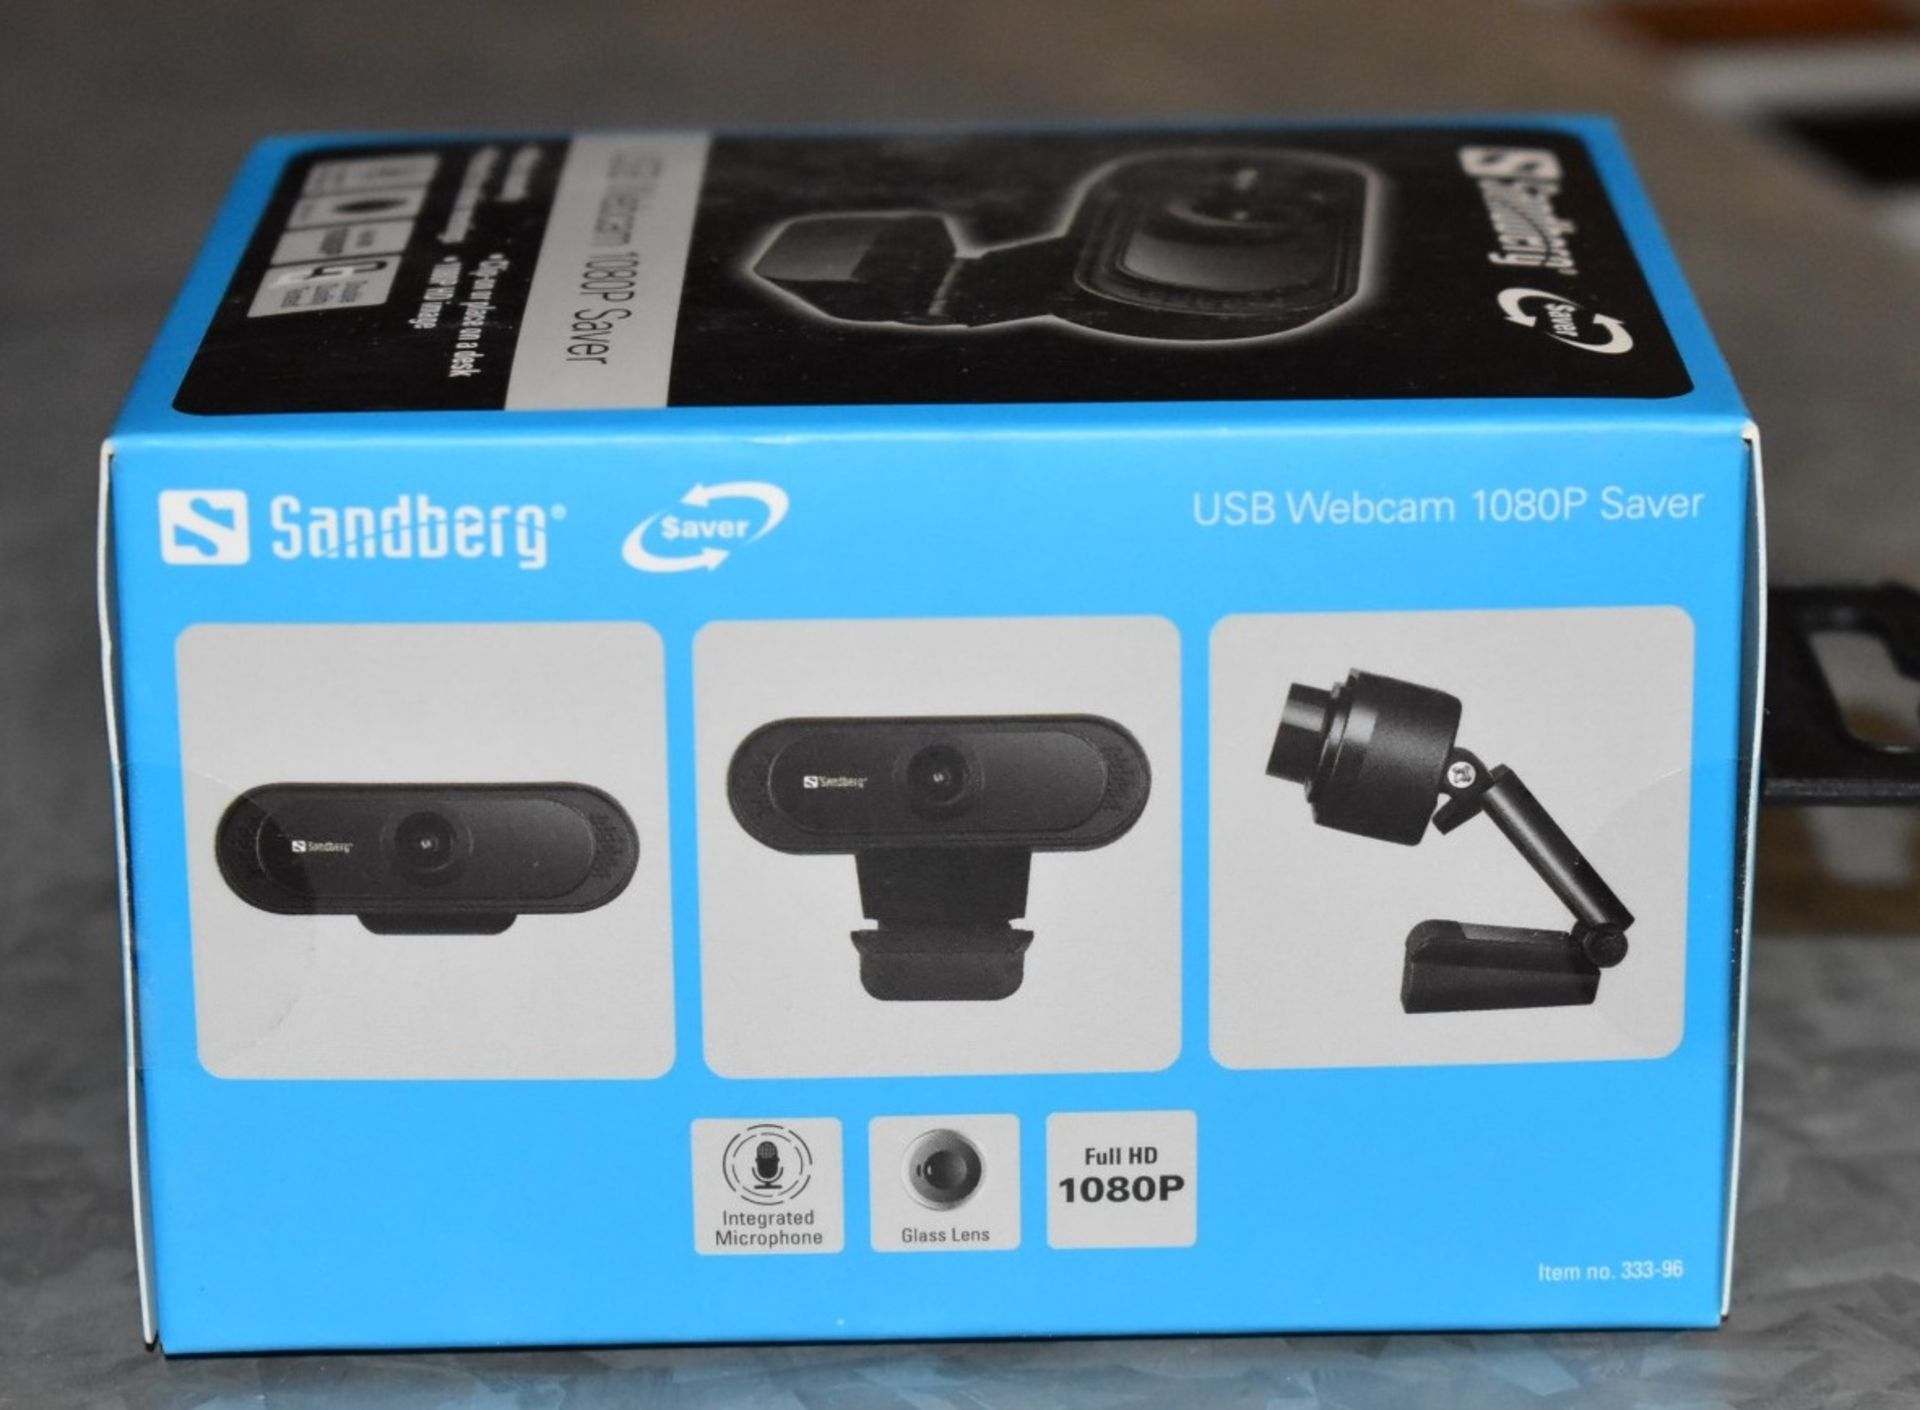 3 x Sandberg USB Full HD 1080p Webcams With Microphone - RRP £34.99 - New Boxed Stock - Image 3 of 3